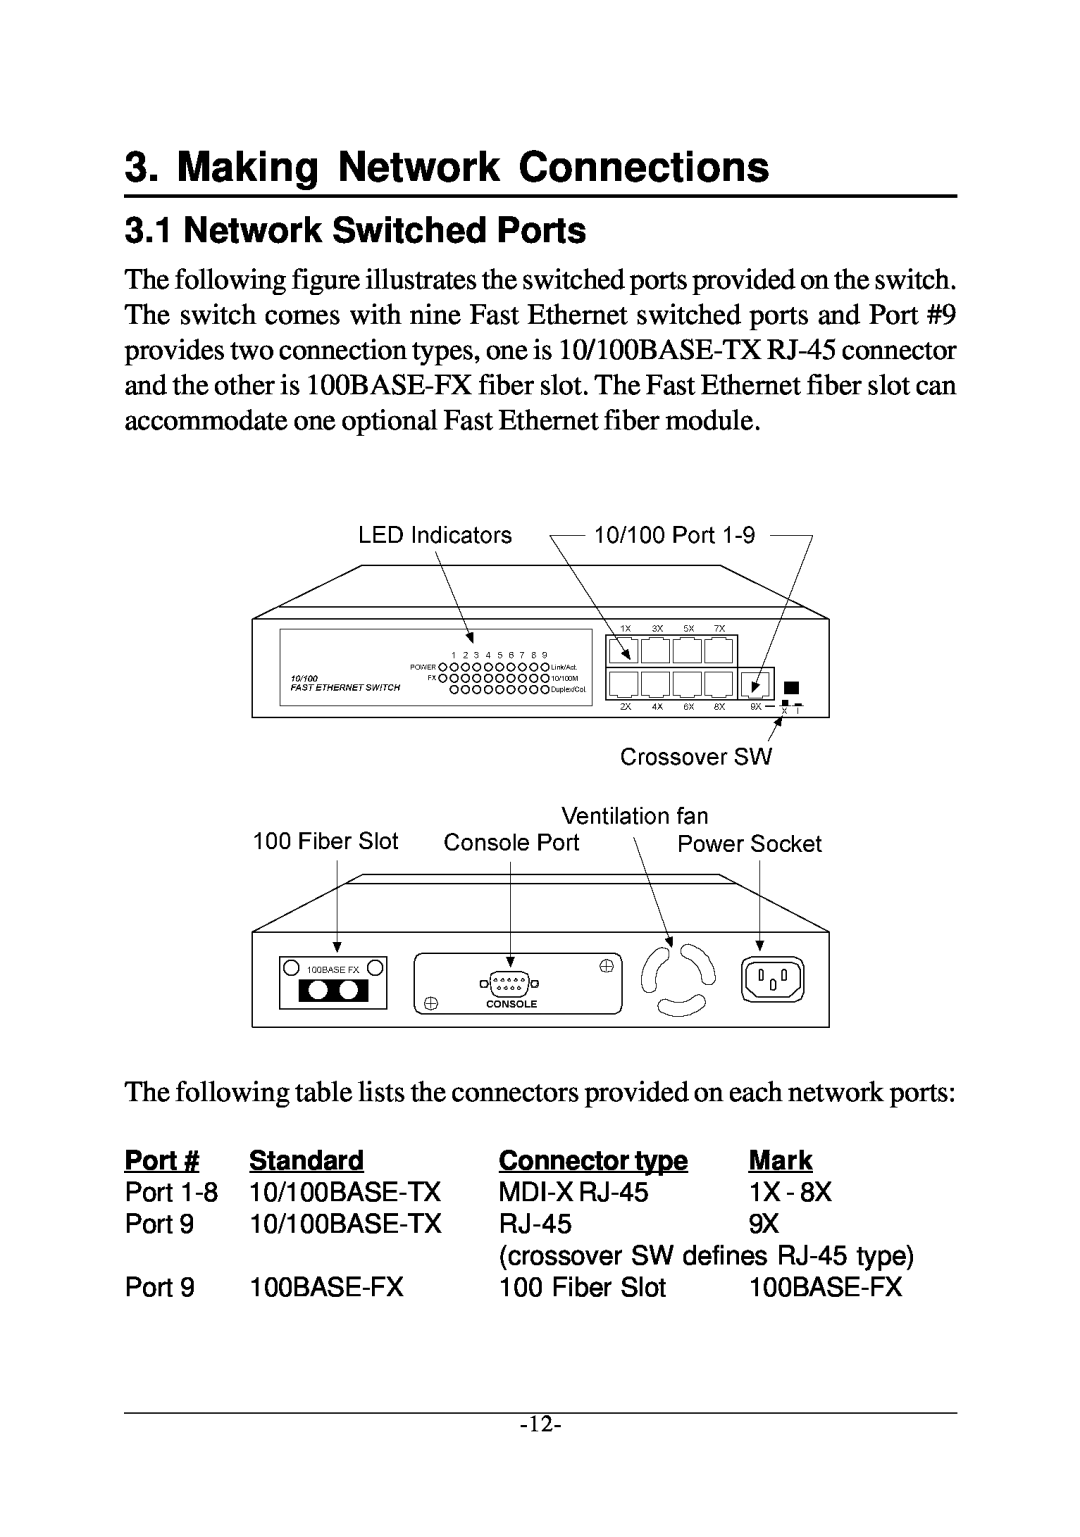 Xerox KS-801 operation manual Making Network Connections, Network Switched Ports 